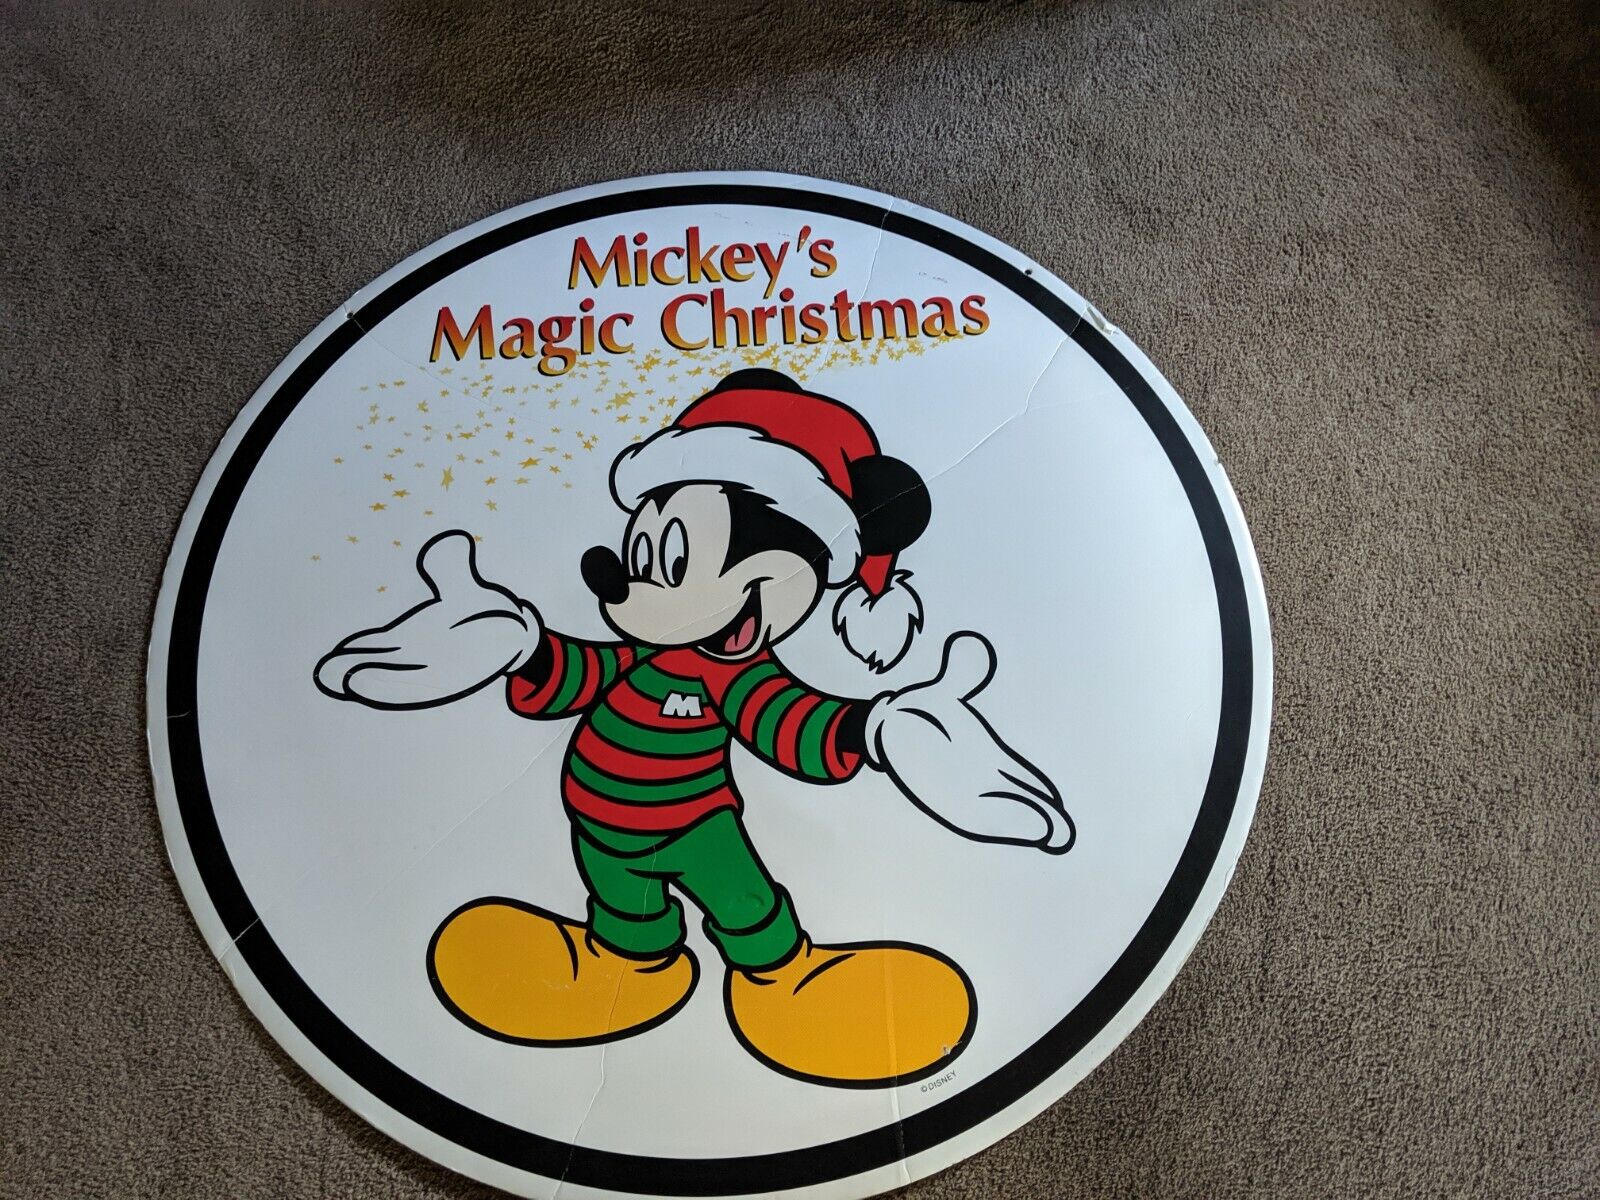 Vintage store display Mickey mouse Disney Xmas sign advertisement magic large